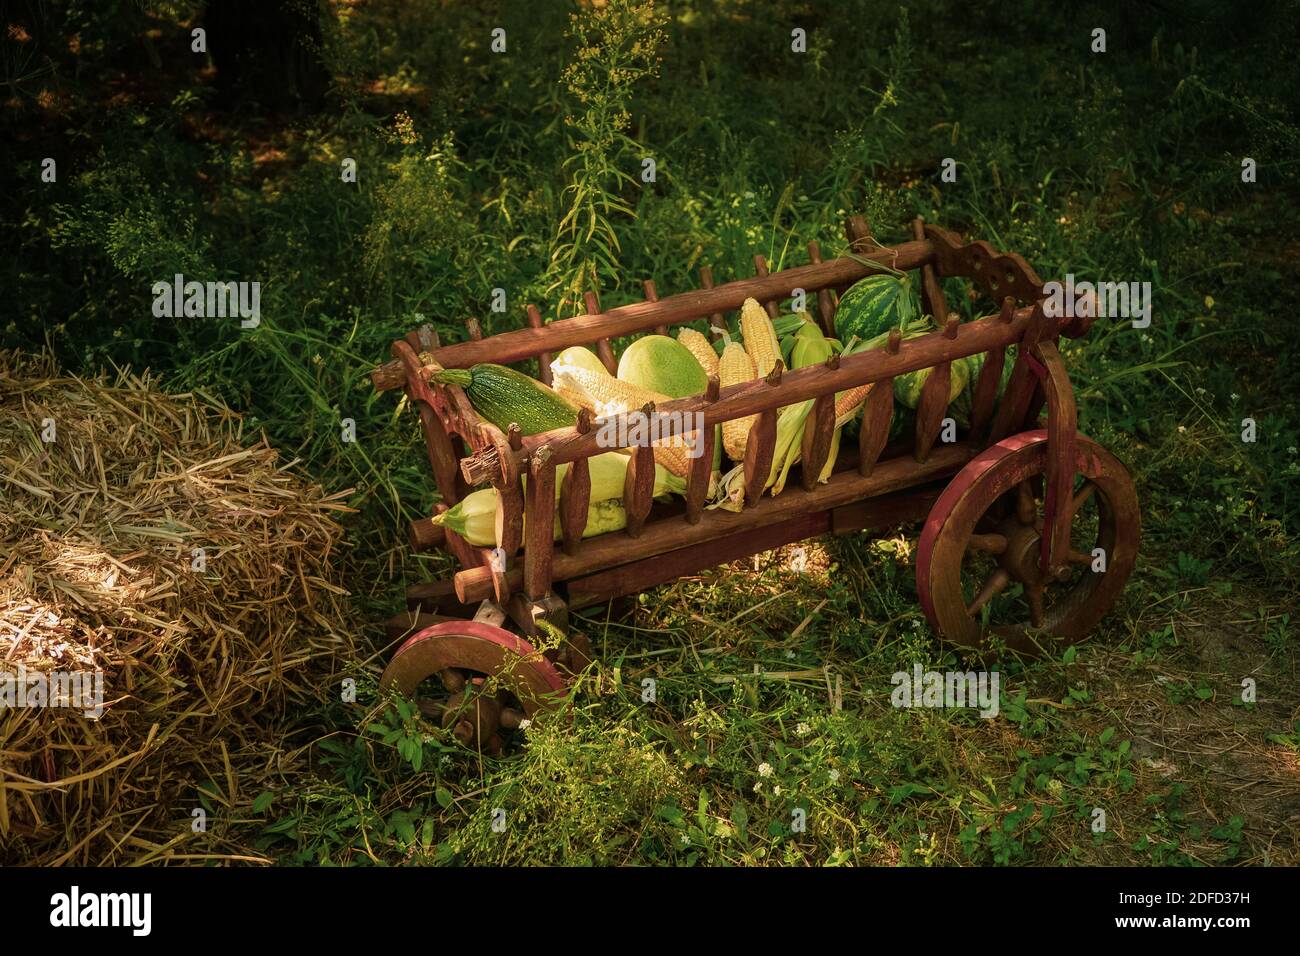 Decorations for harvest festival with a wooden manger with gifts from the fields of corn, watermelon, zucchini standing in the garden near the house Stock Photo